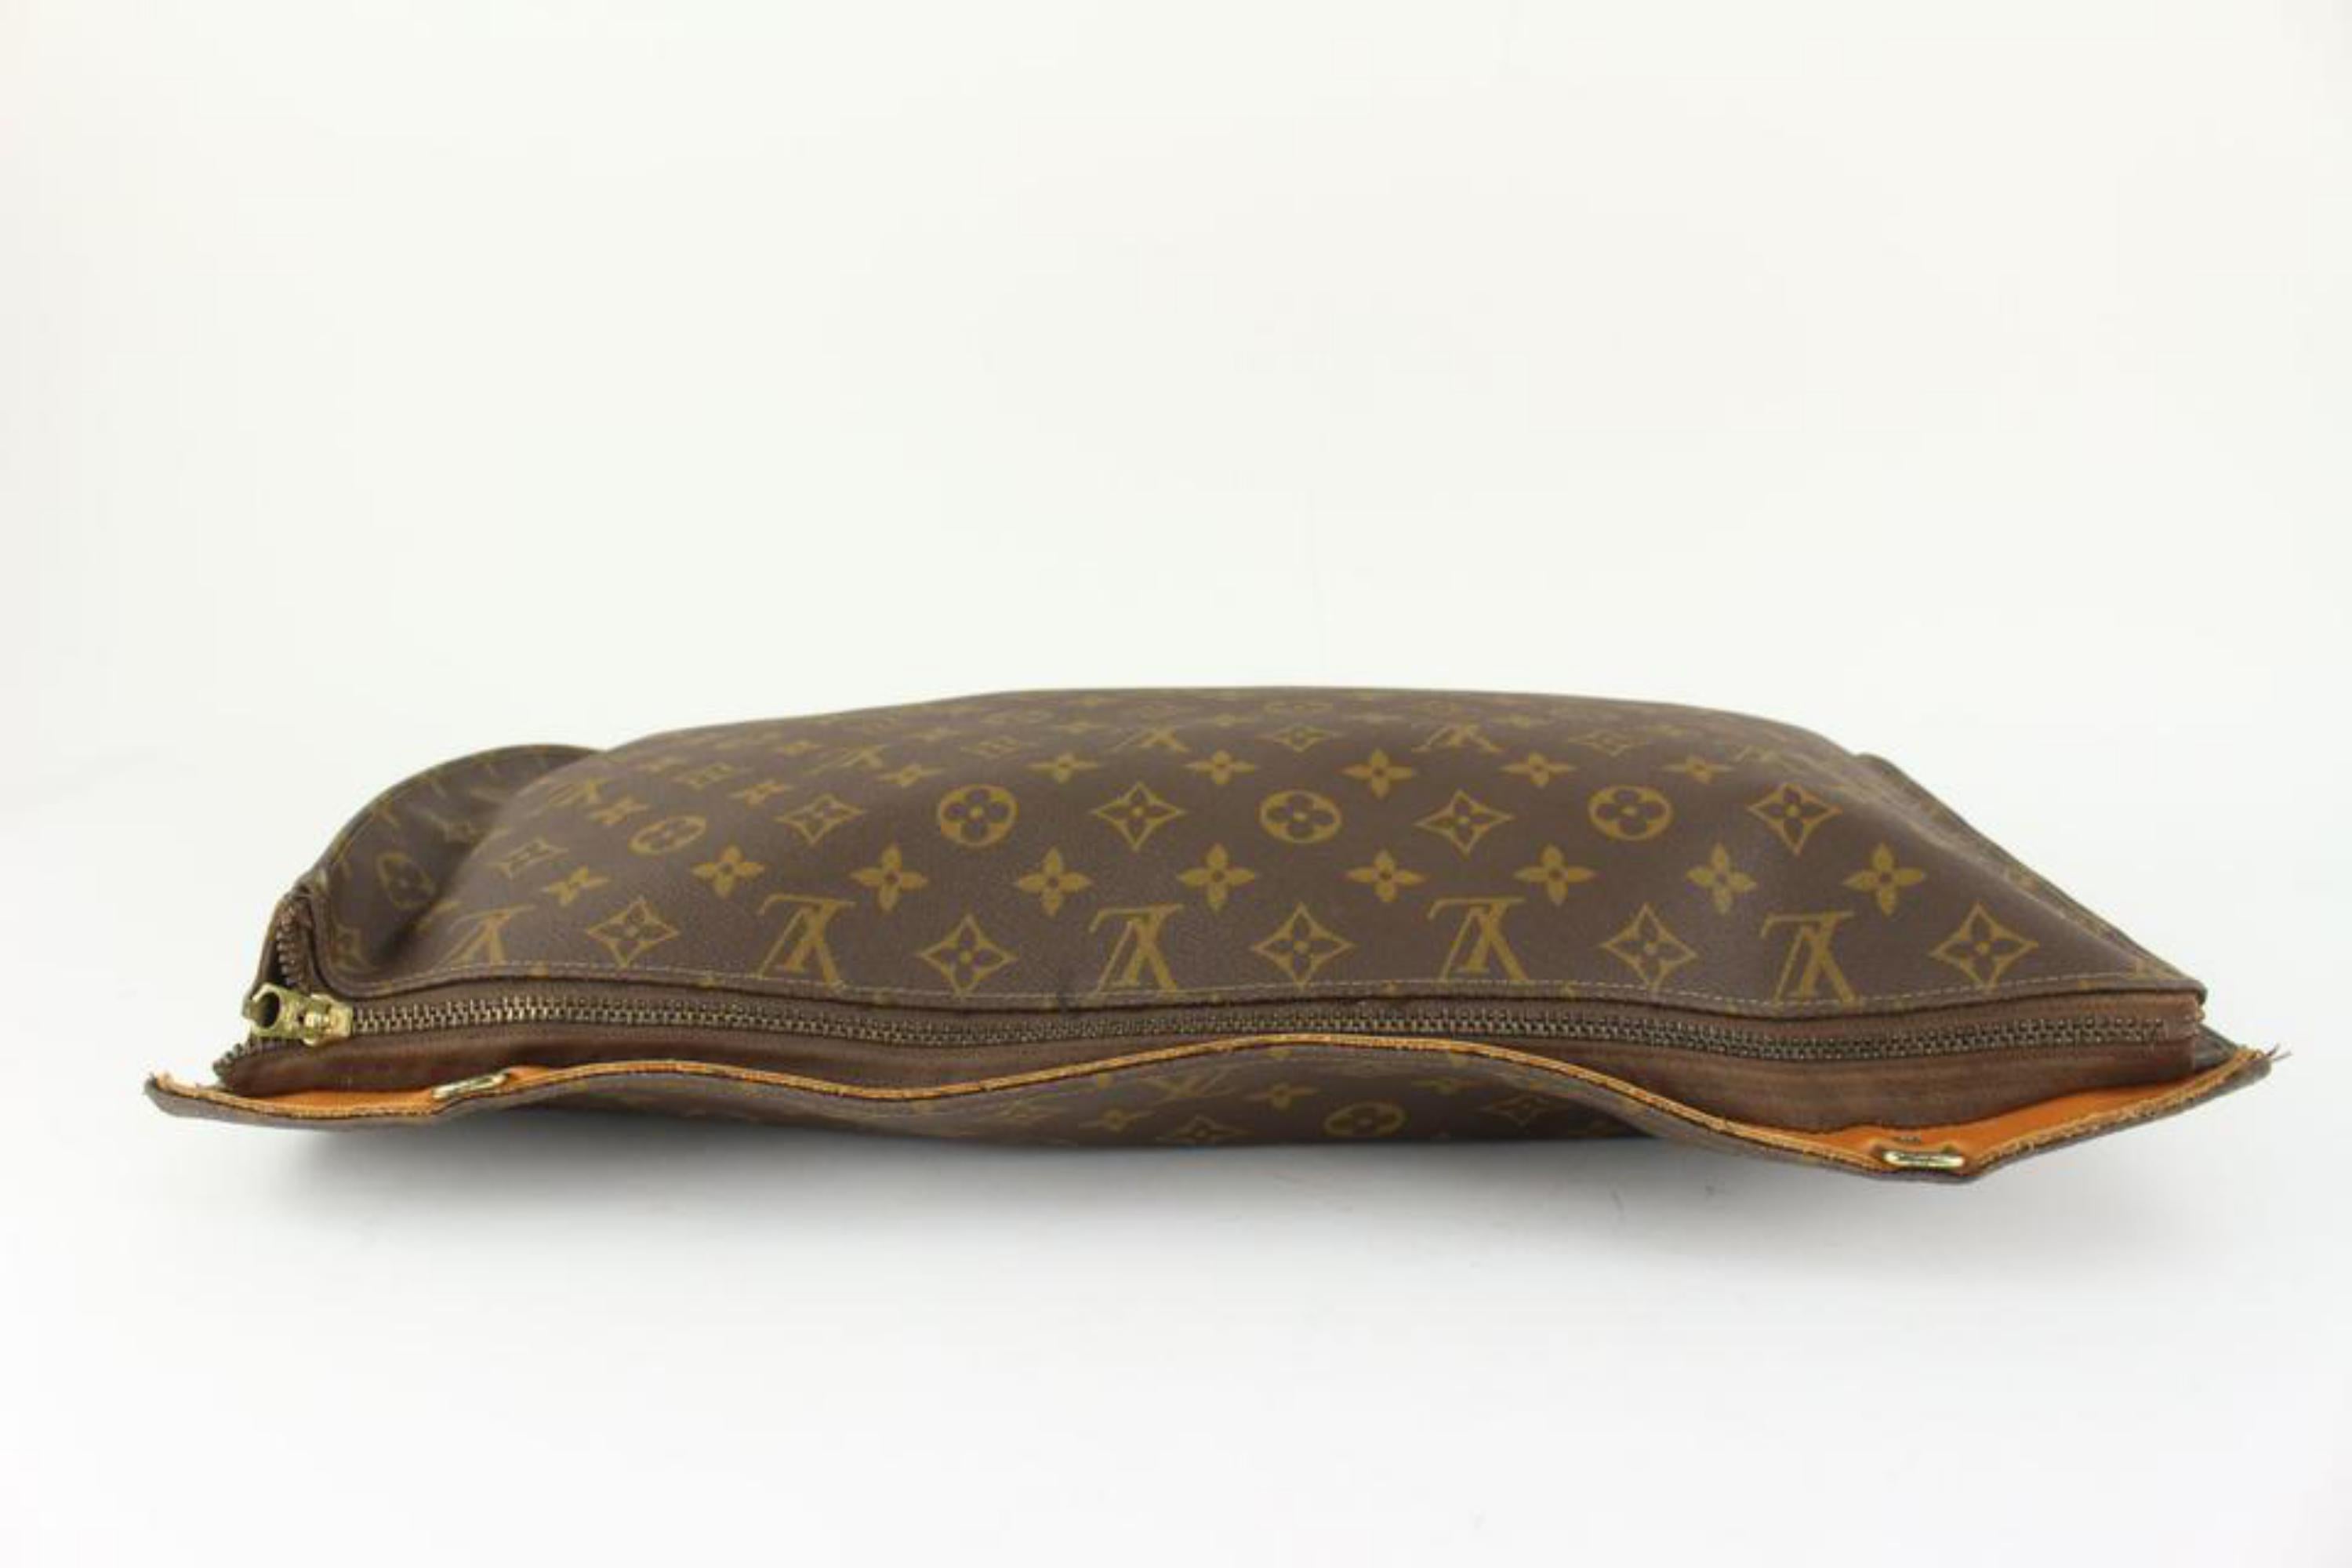 Louis Vuitton Rare Vintage Monogram Garment Bag Insert Pouch 6LZ1209 In Good Condition For Sale In Dix hills, NY